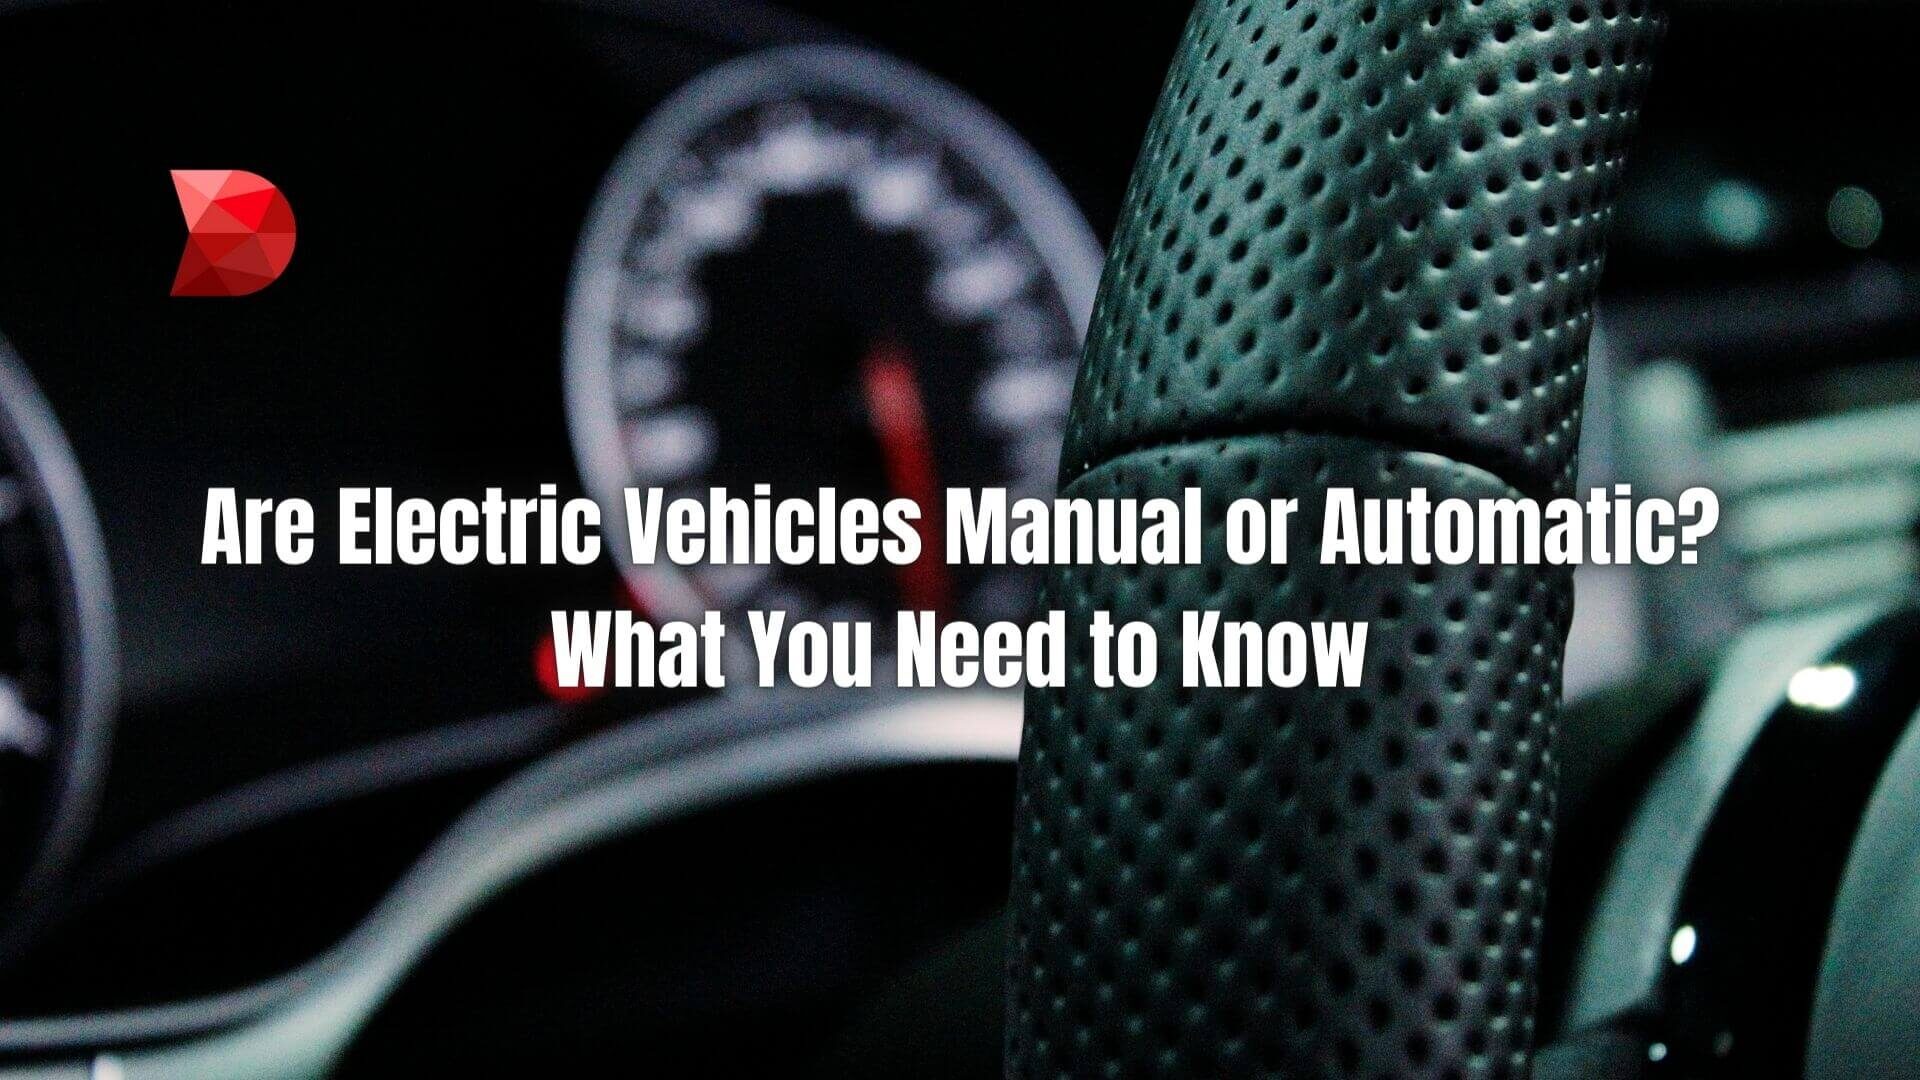 Unlock the mysteries of electric vehicles! Click here to explore this guide to find out if electric vehicles are manual or automatic.